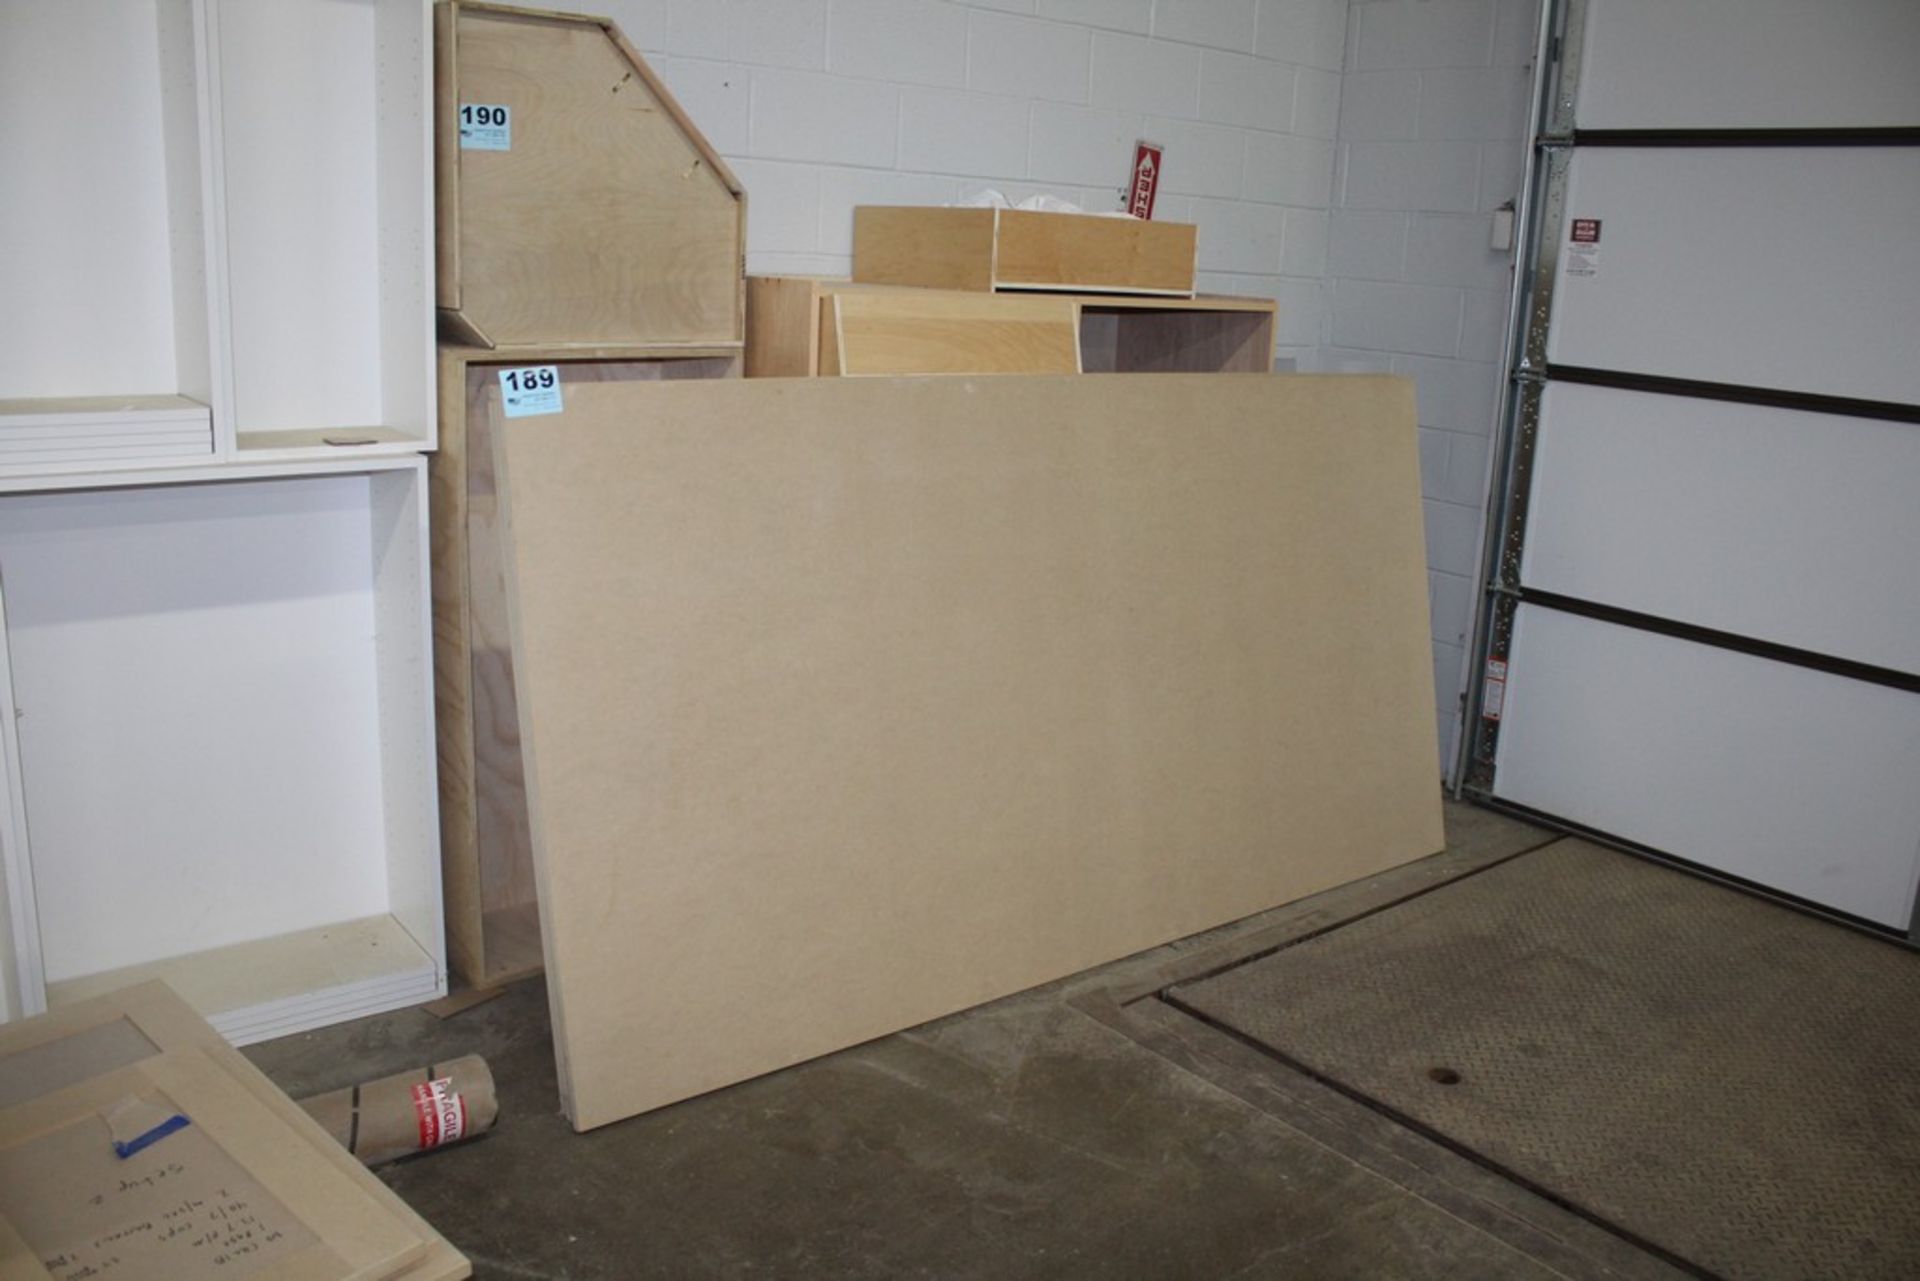 (3) 49" X 97" X 3/4" SHEETS OF PARTICLE BOARD